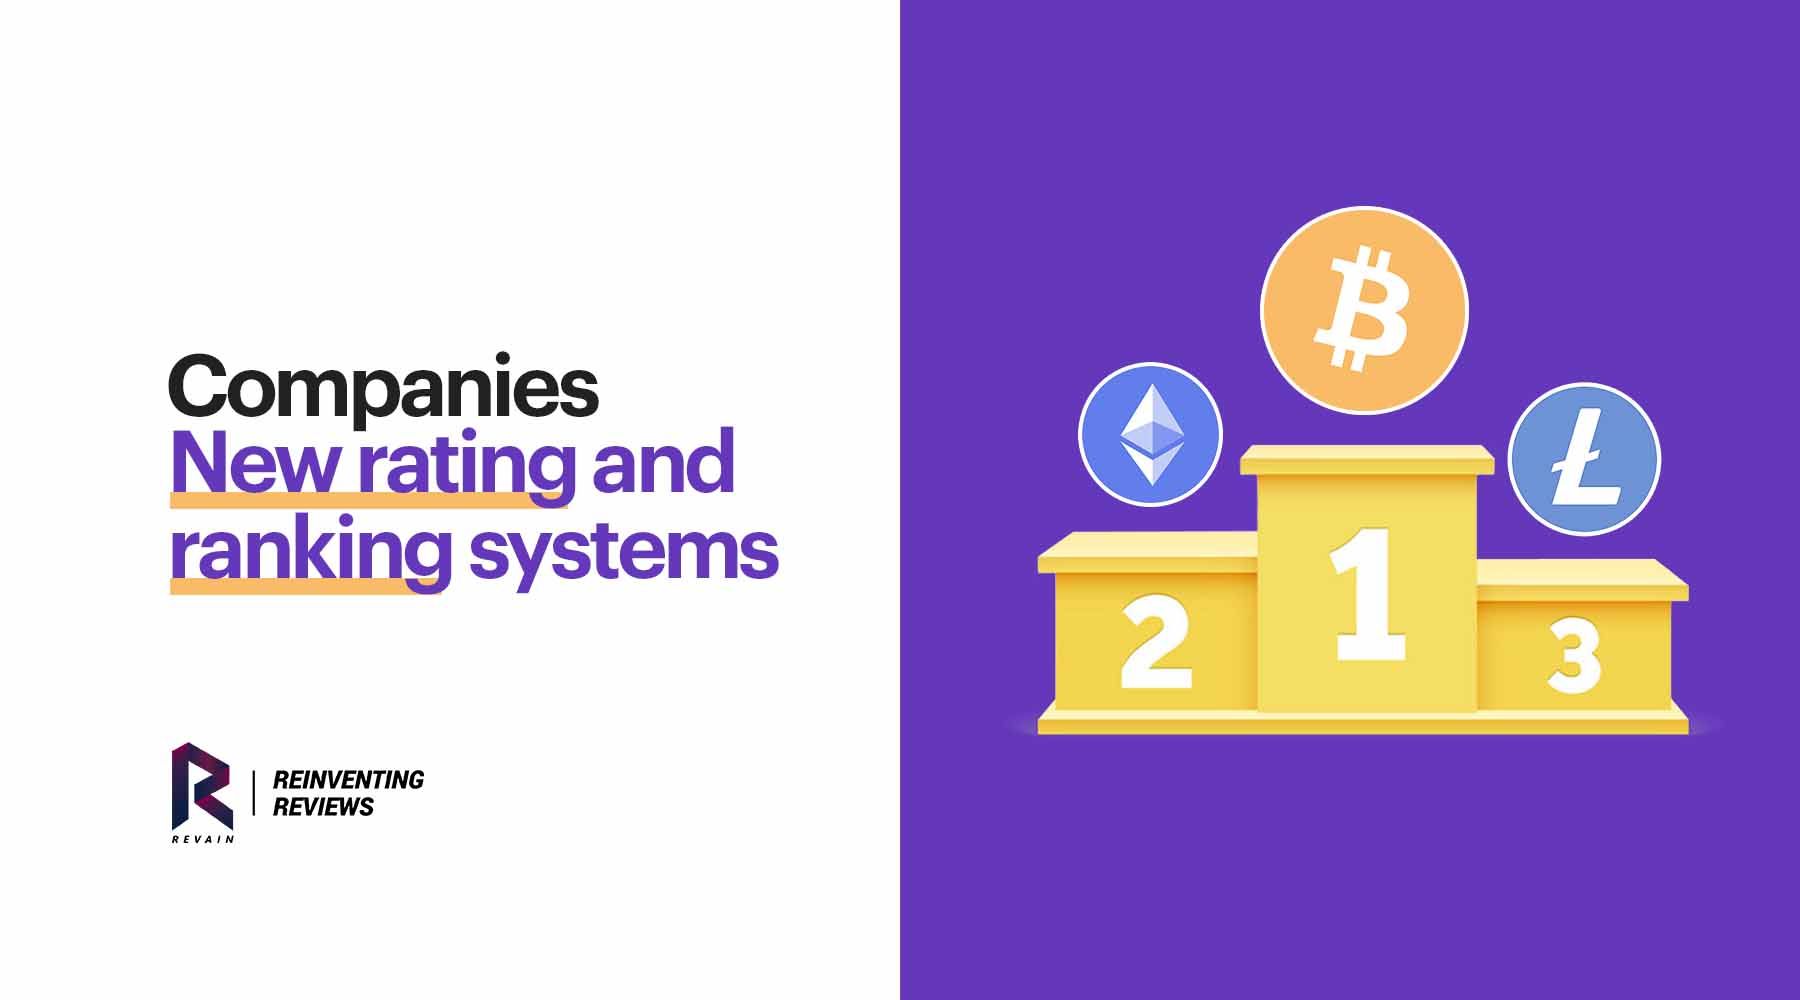 Article Revain updates companies rating and ranking systems